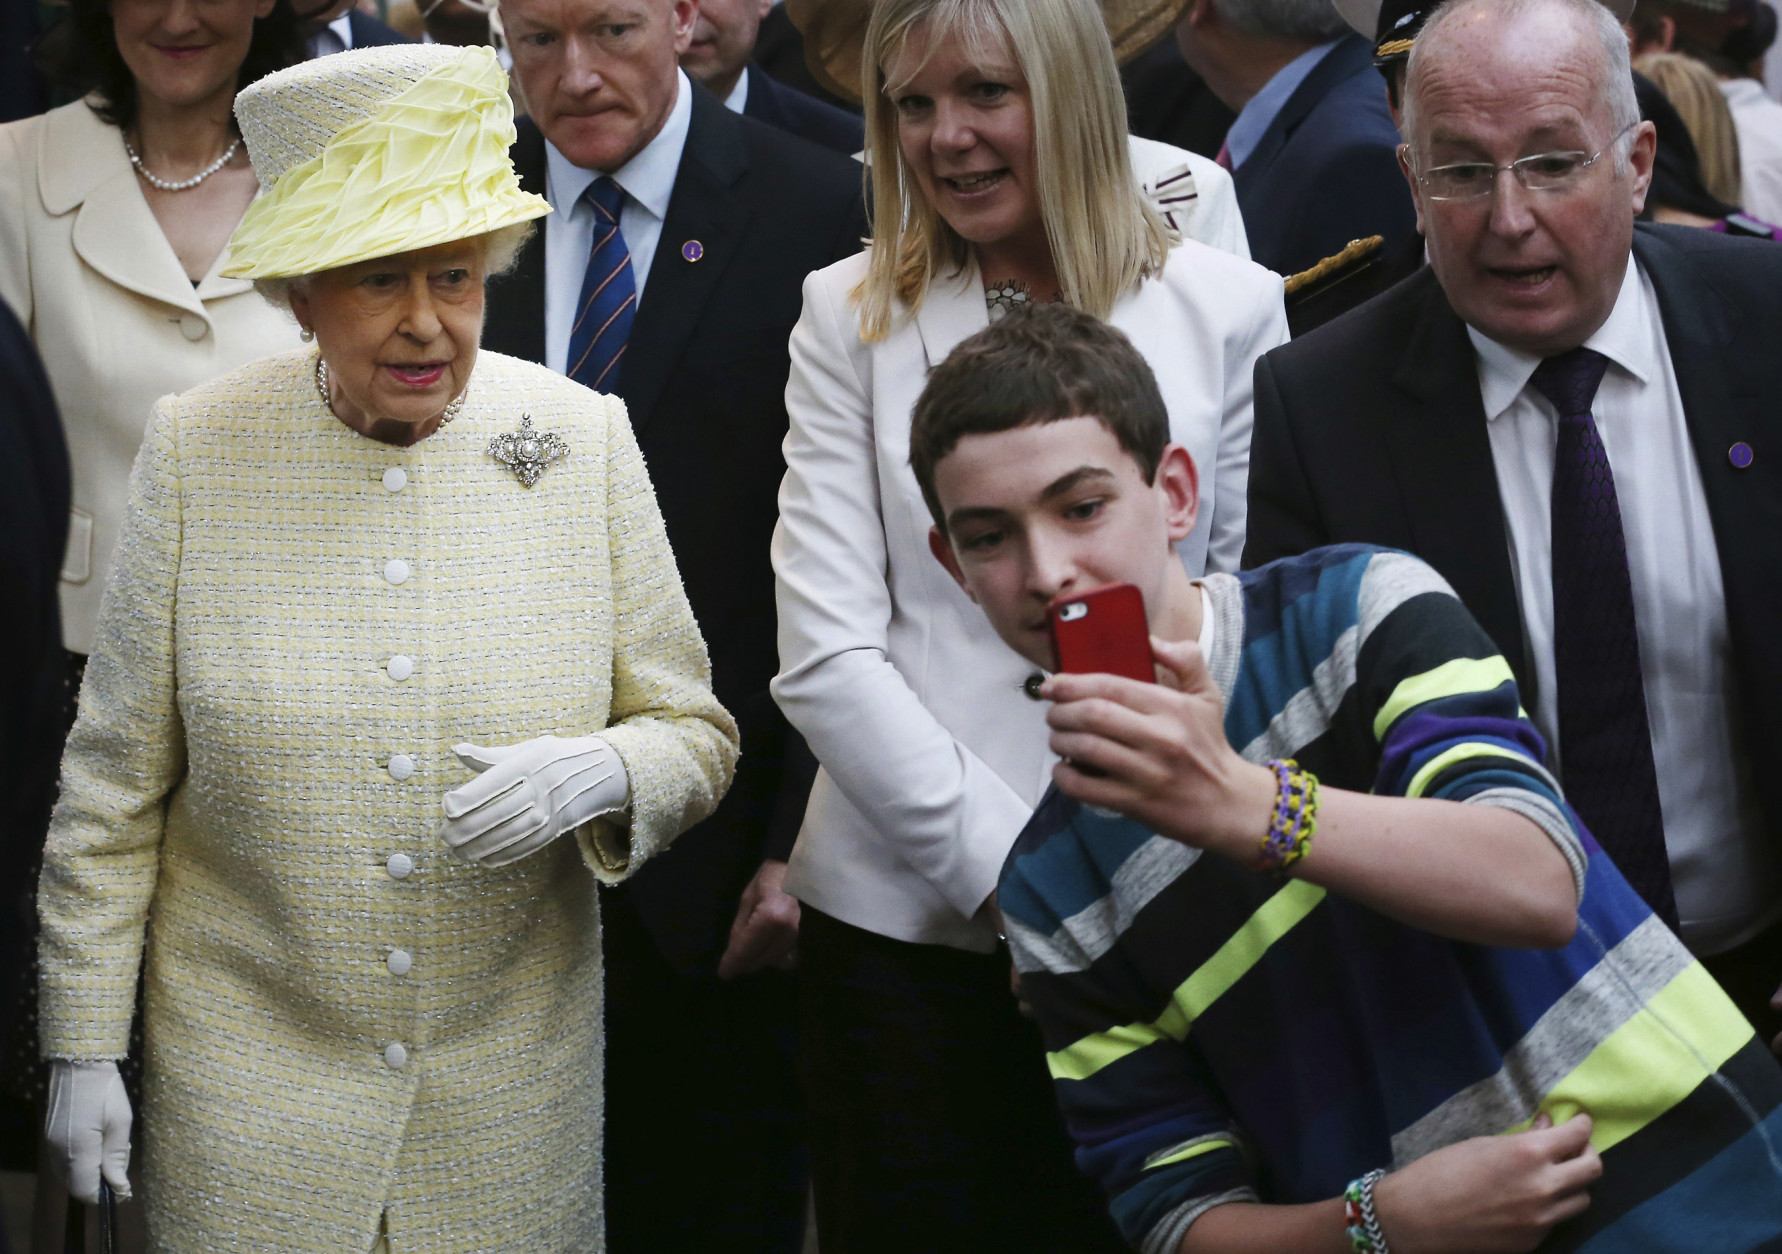 FOR USE AS DESIRED, YEAR END PHOTOS - FILE - A local youth takes a selfie photograph in front of Queen Elizabeth II during a visit to St George's indoor market on  in Belfast Tuesday June 24, 2014. The Queen is on a 3 day visit to Northern Ireland.  (AP Photo/Peter Macdiarmid, File Pool)